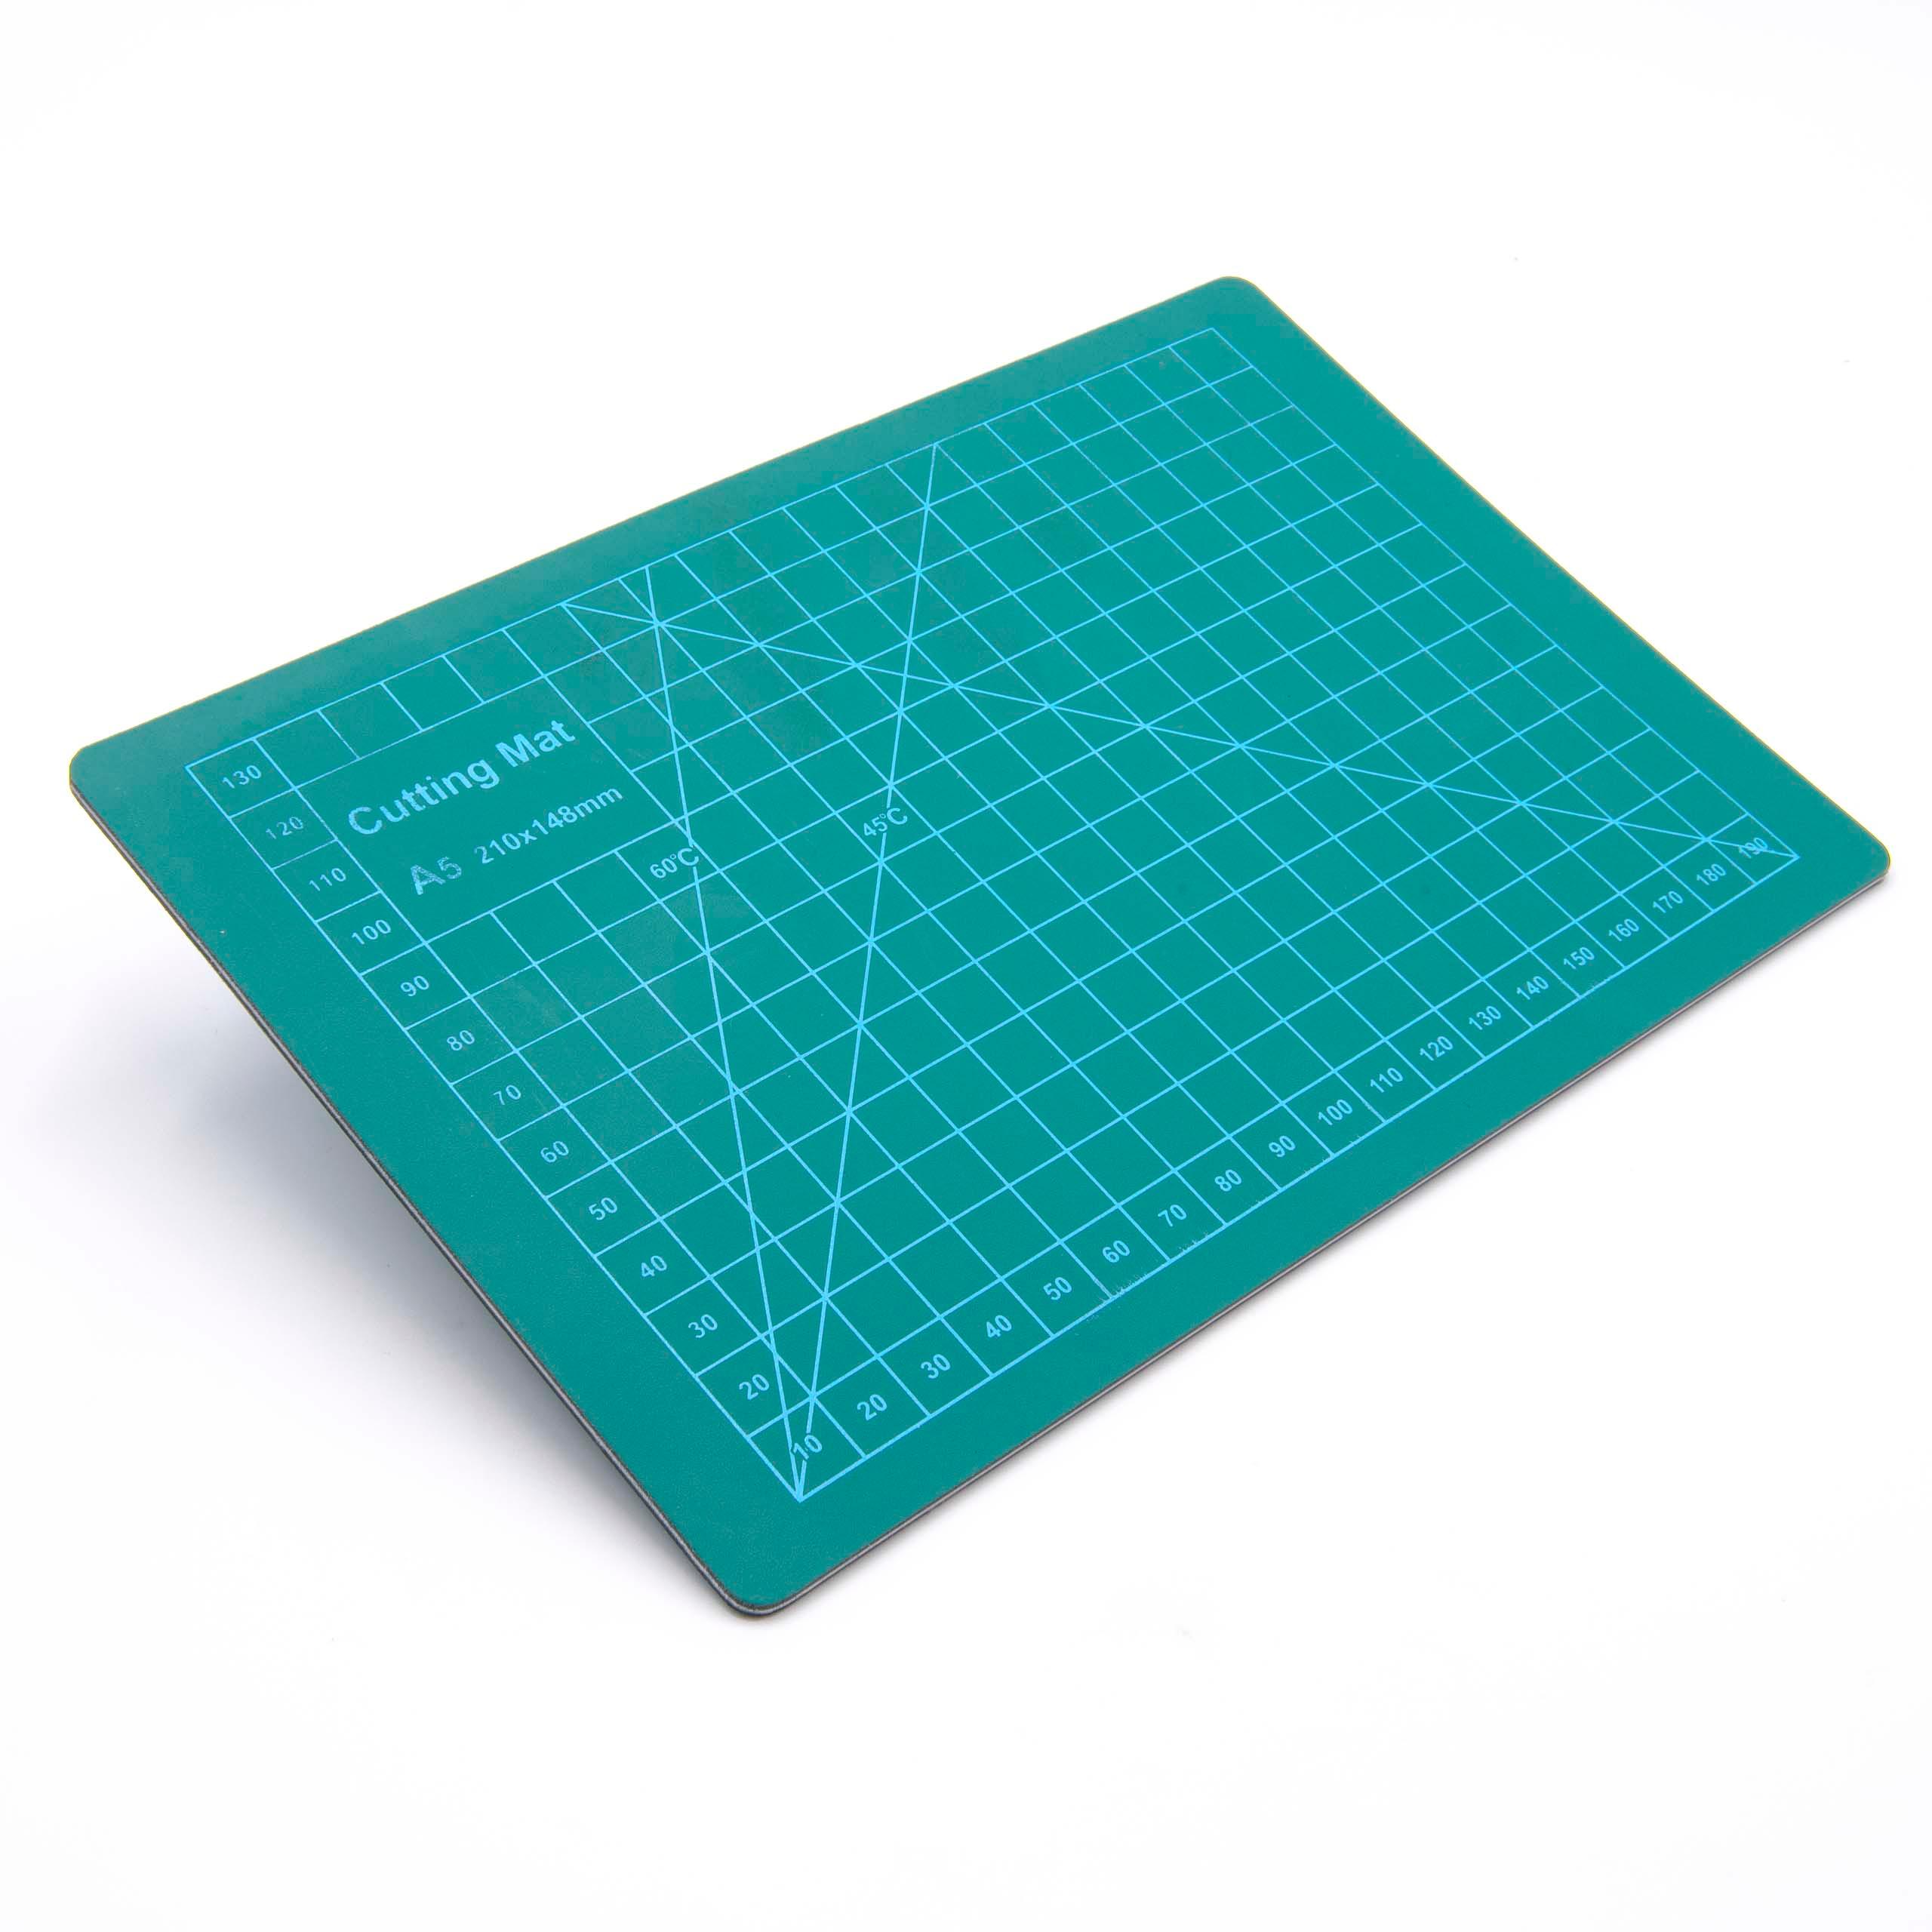 Cutting Mat - A5 Working Surface, 15 x 22 cm, Self-Healing, With Grid, Double-Sided